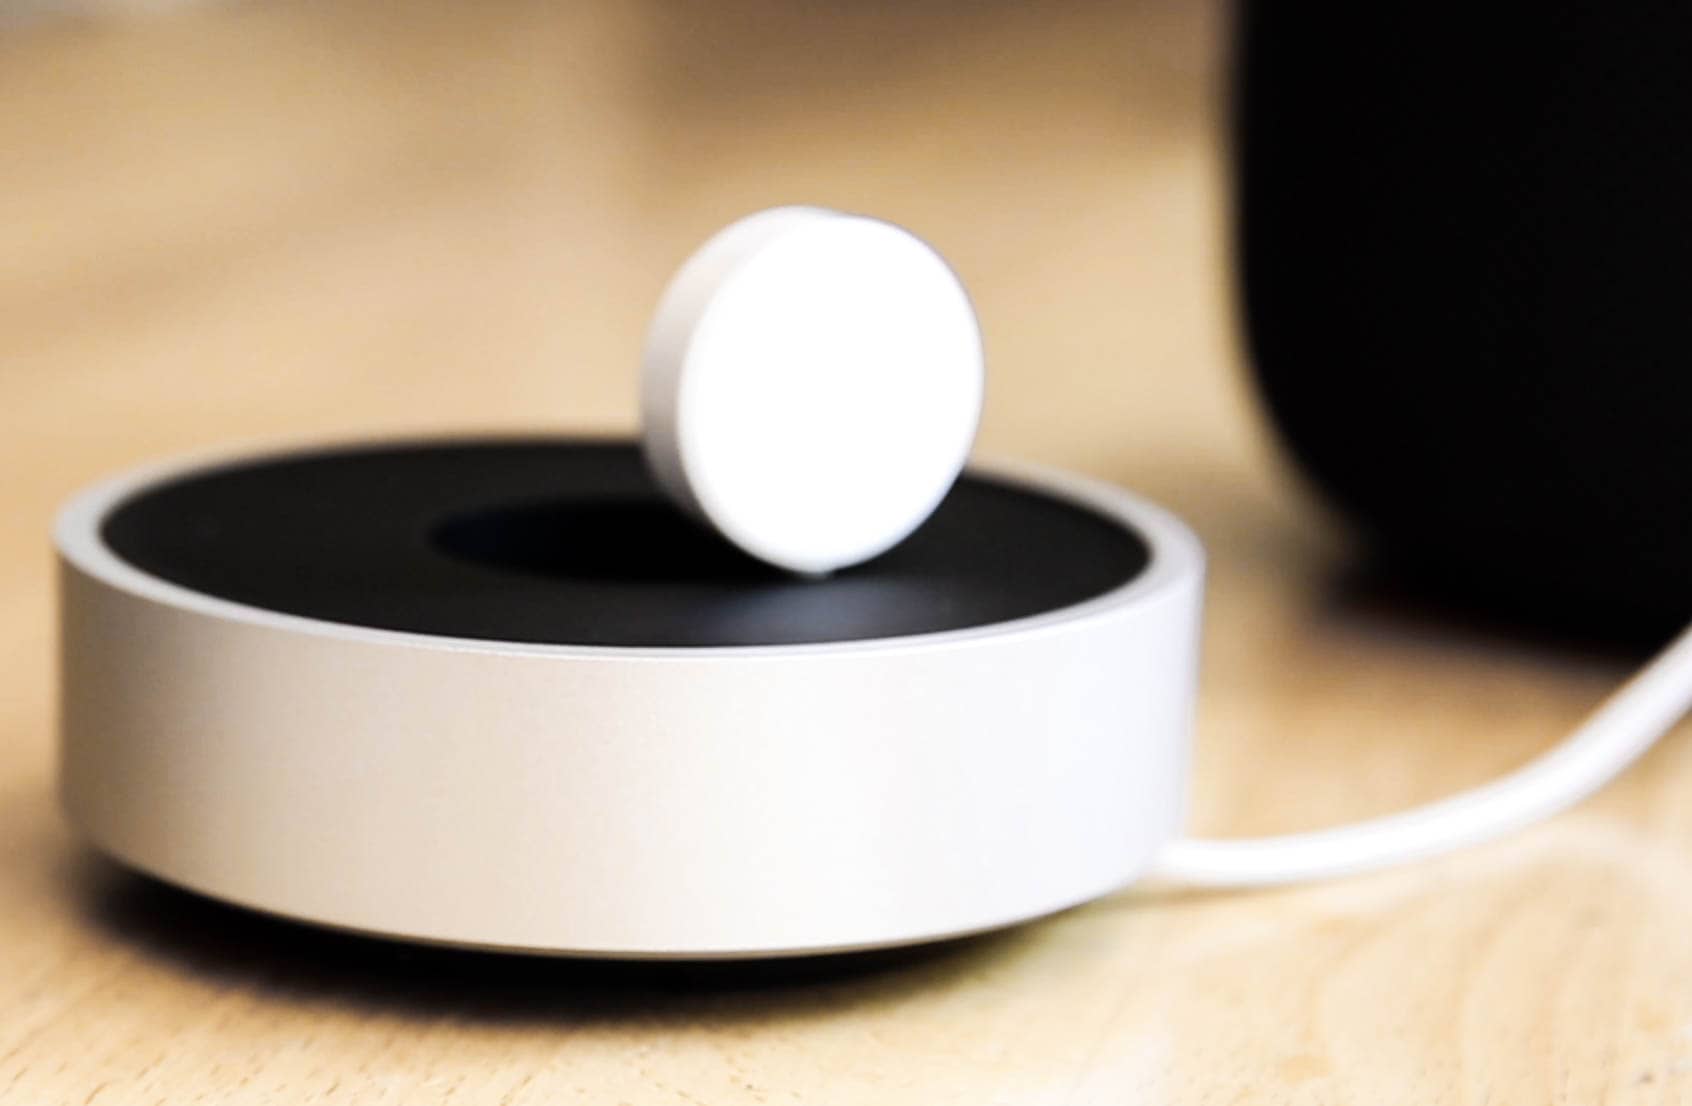 The charging puck sticks out, ready to receive your Apple Watch.